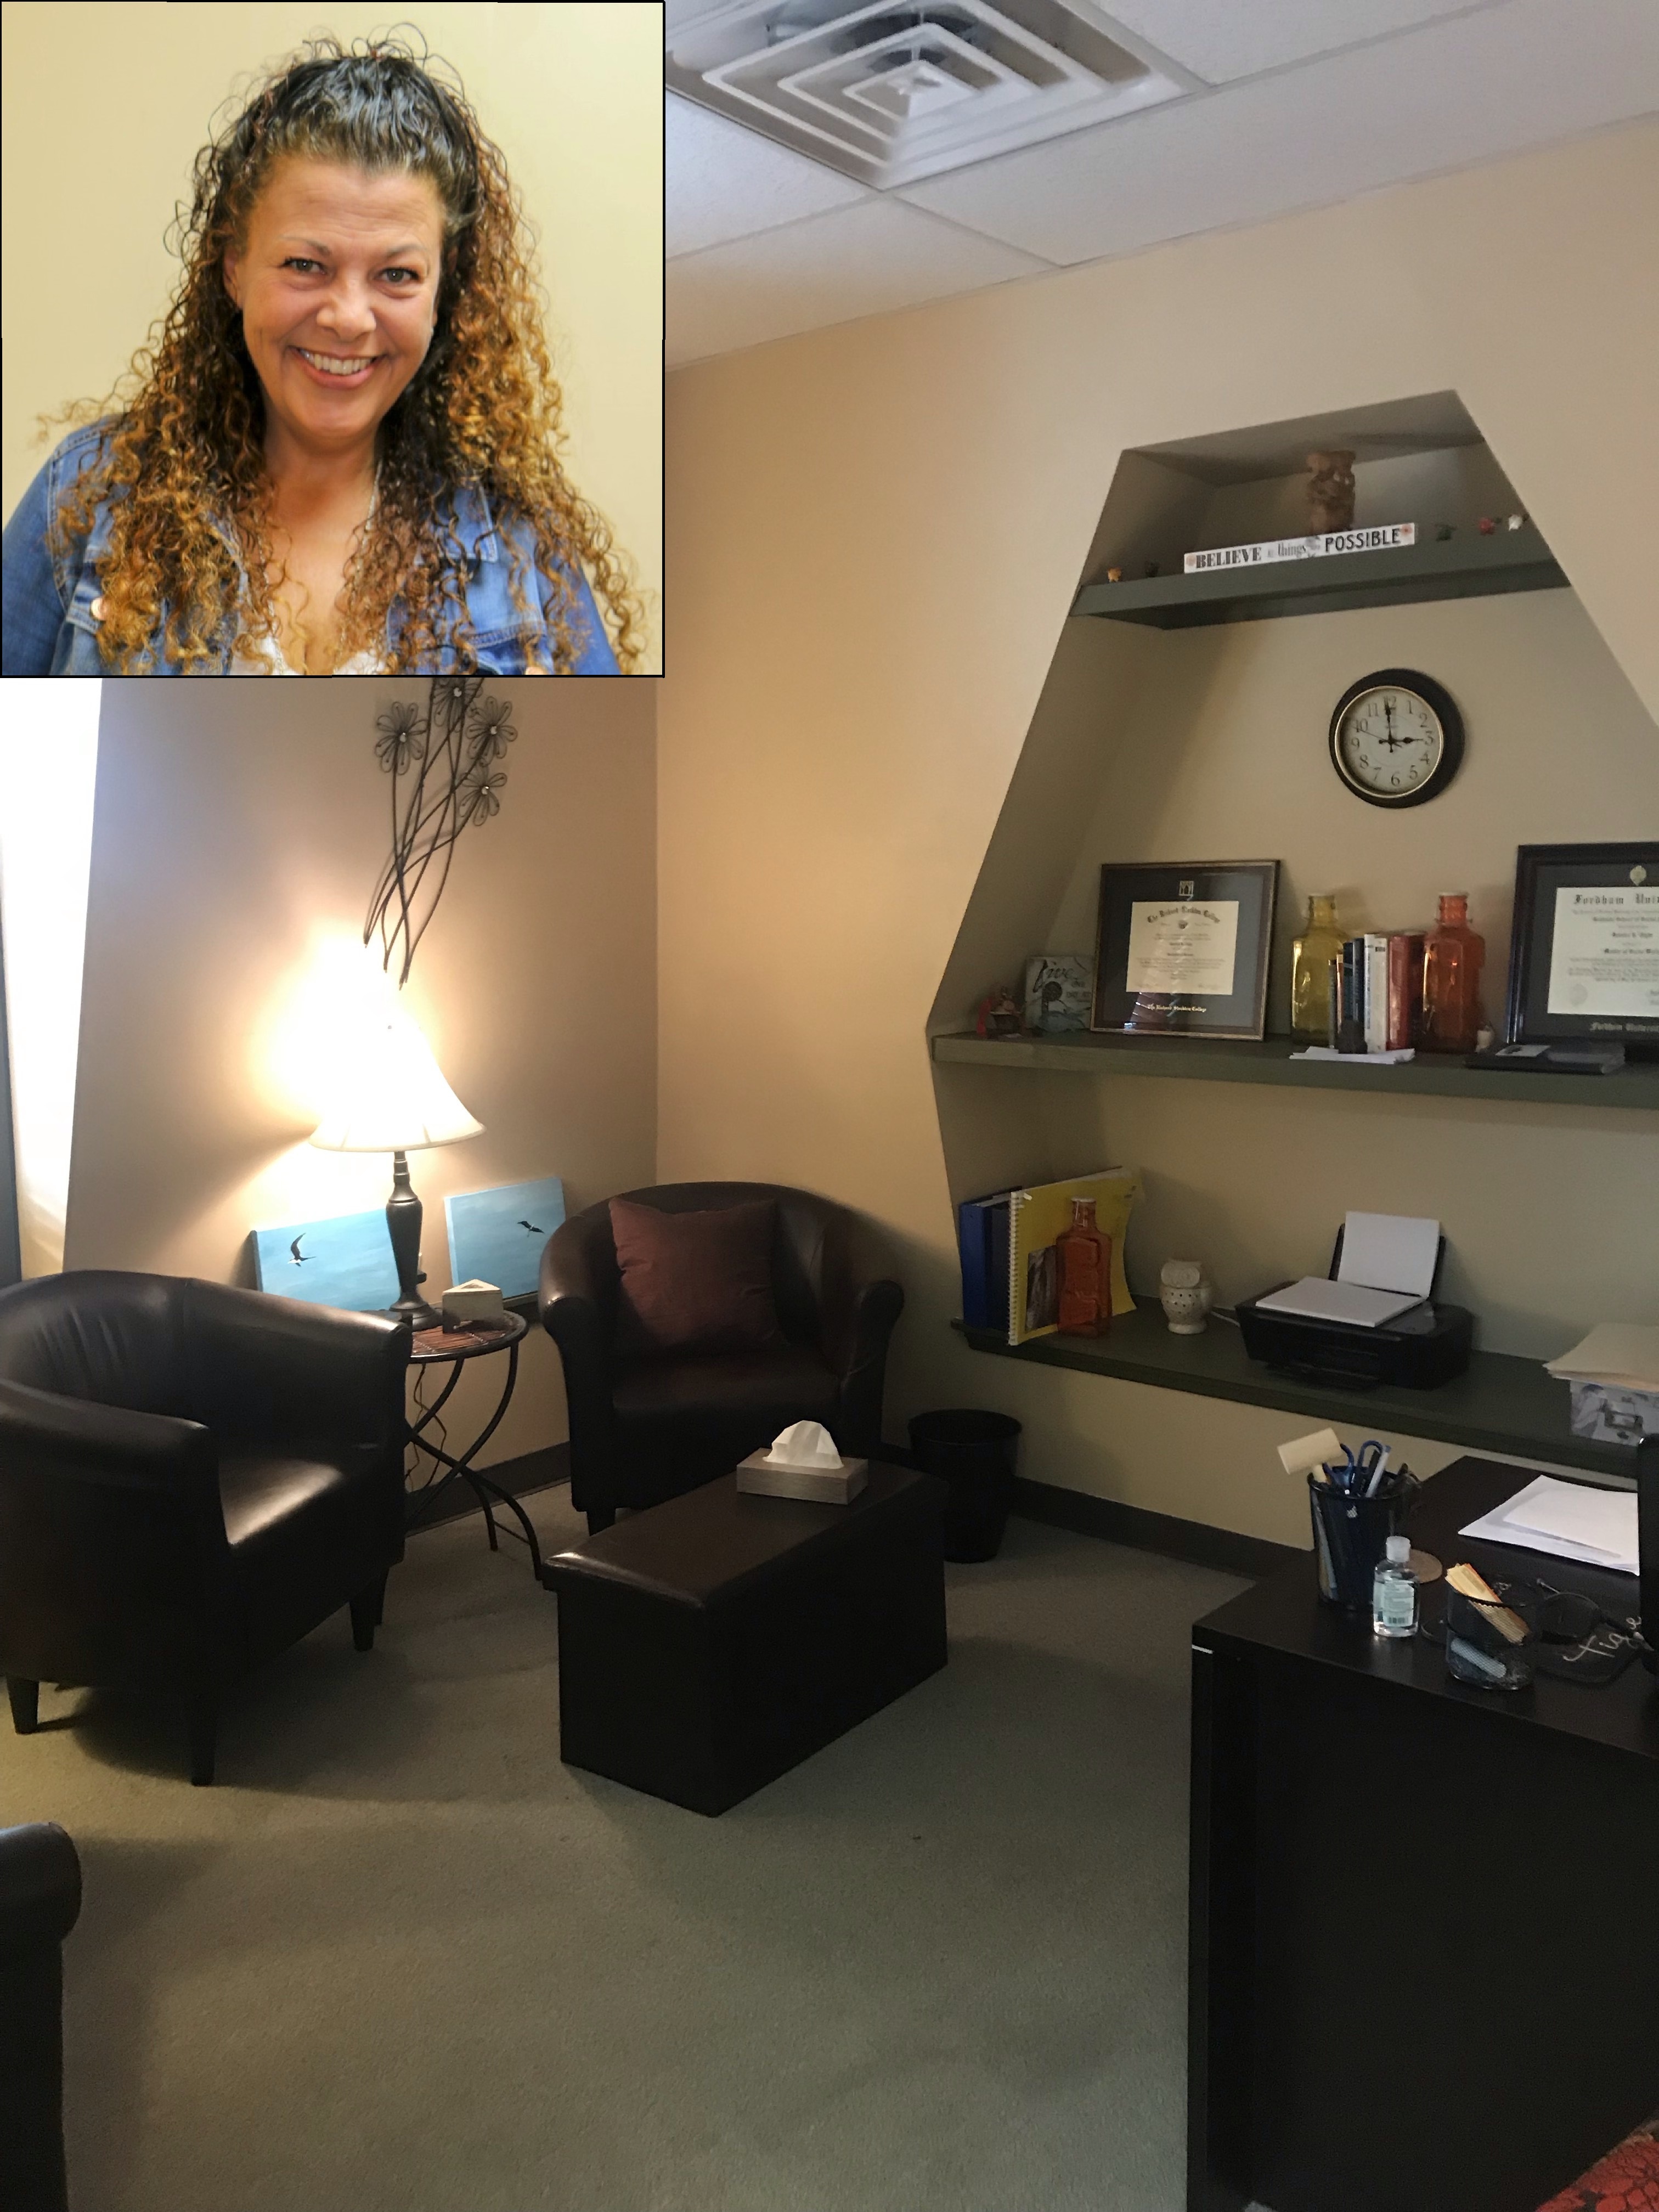  Jessica R. Tighe and her office interior.